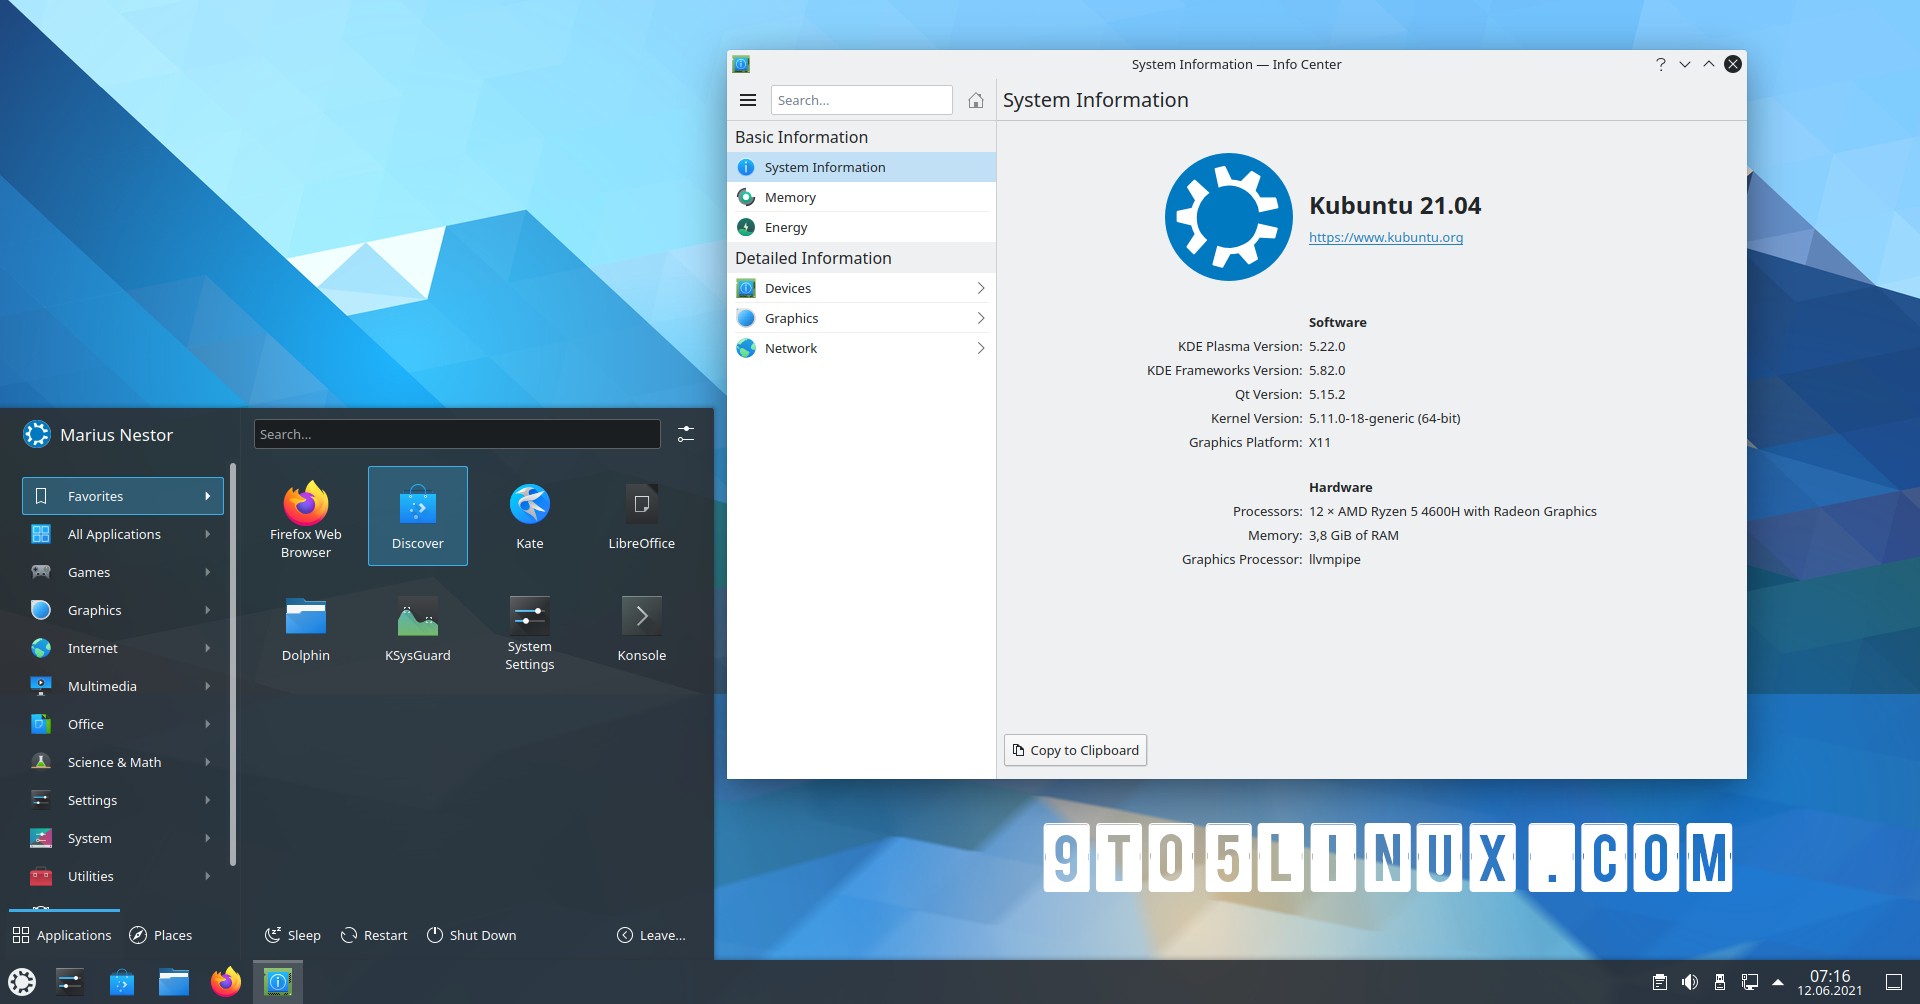 You Can Now Install KDE Plasma 5.22 on Kubuntu 21.04, Here’s How